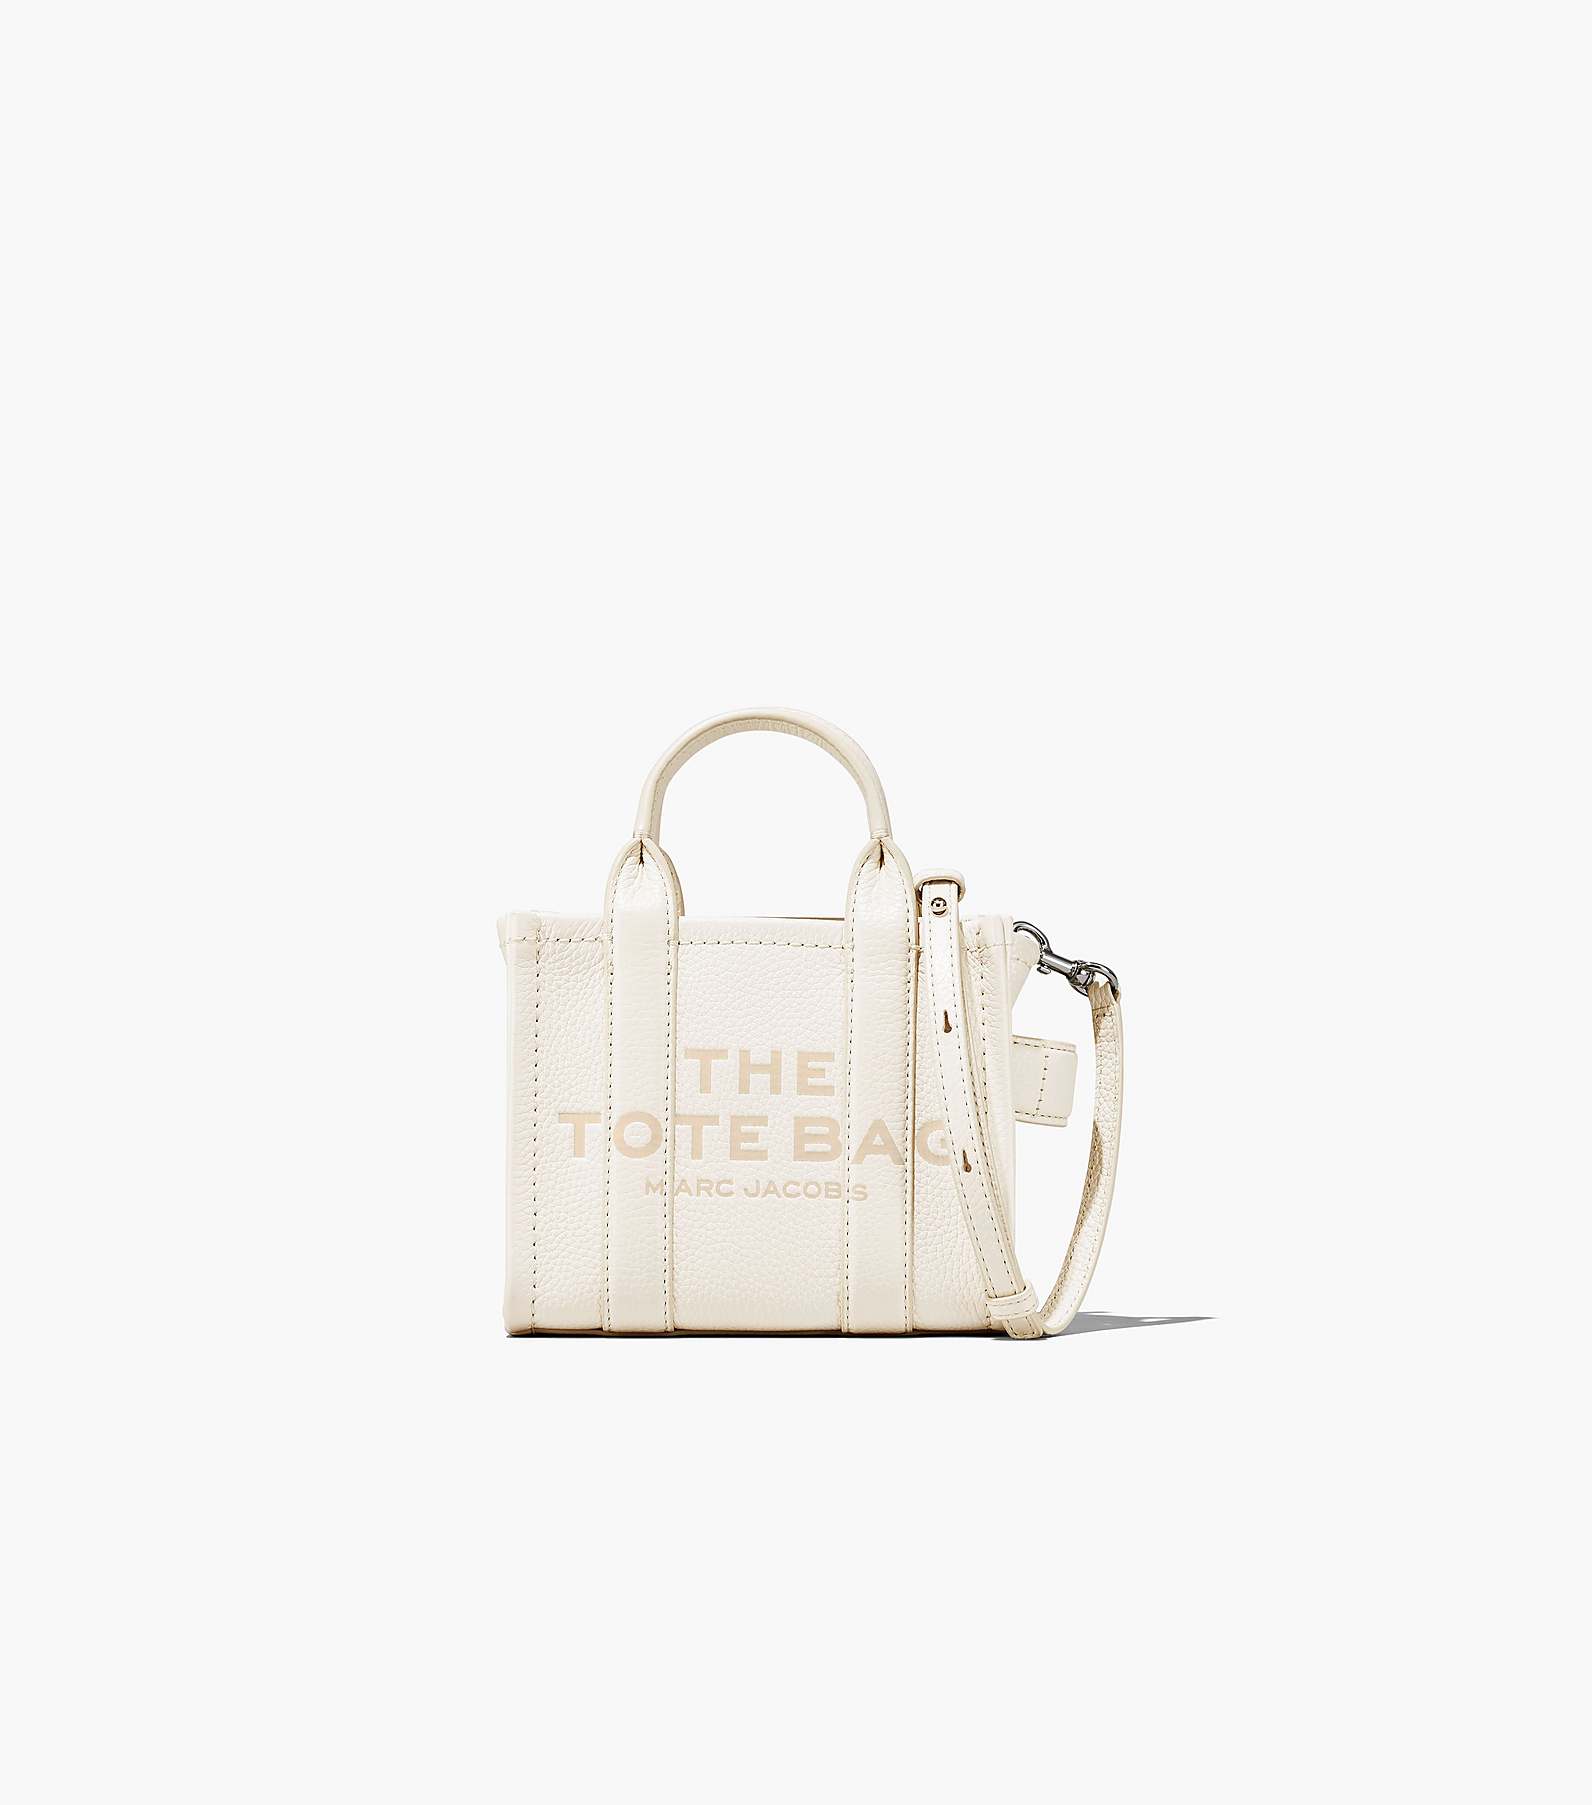 The Leather Micro Tote Bag, Marc Jacobs